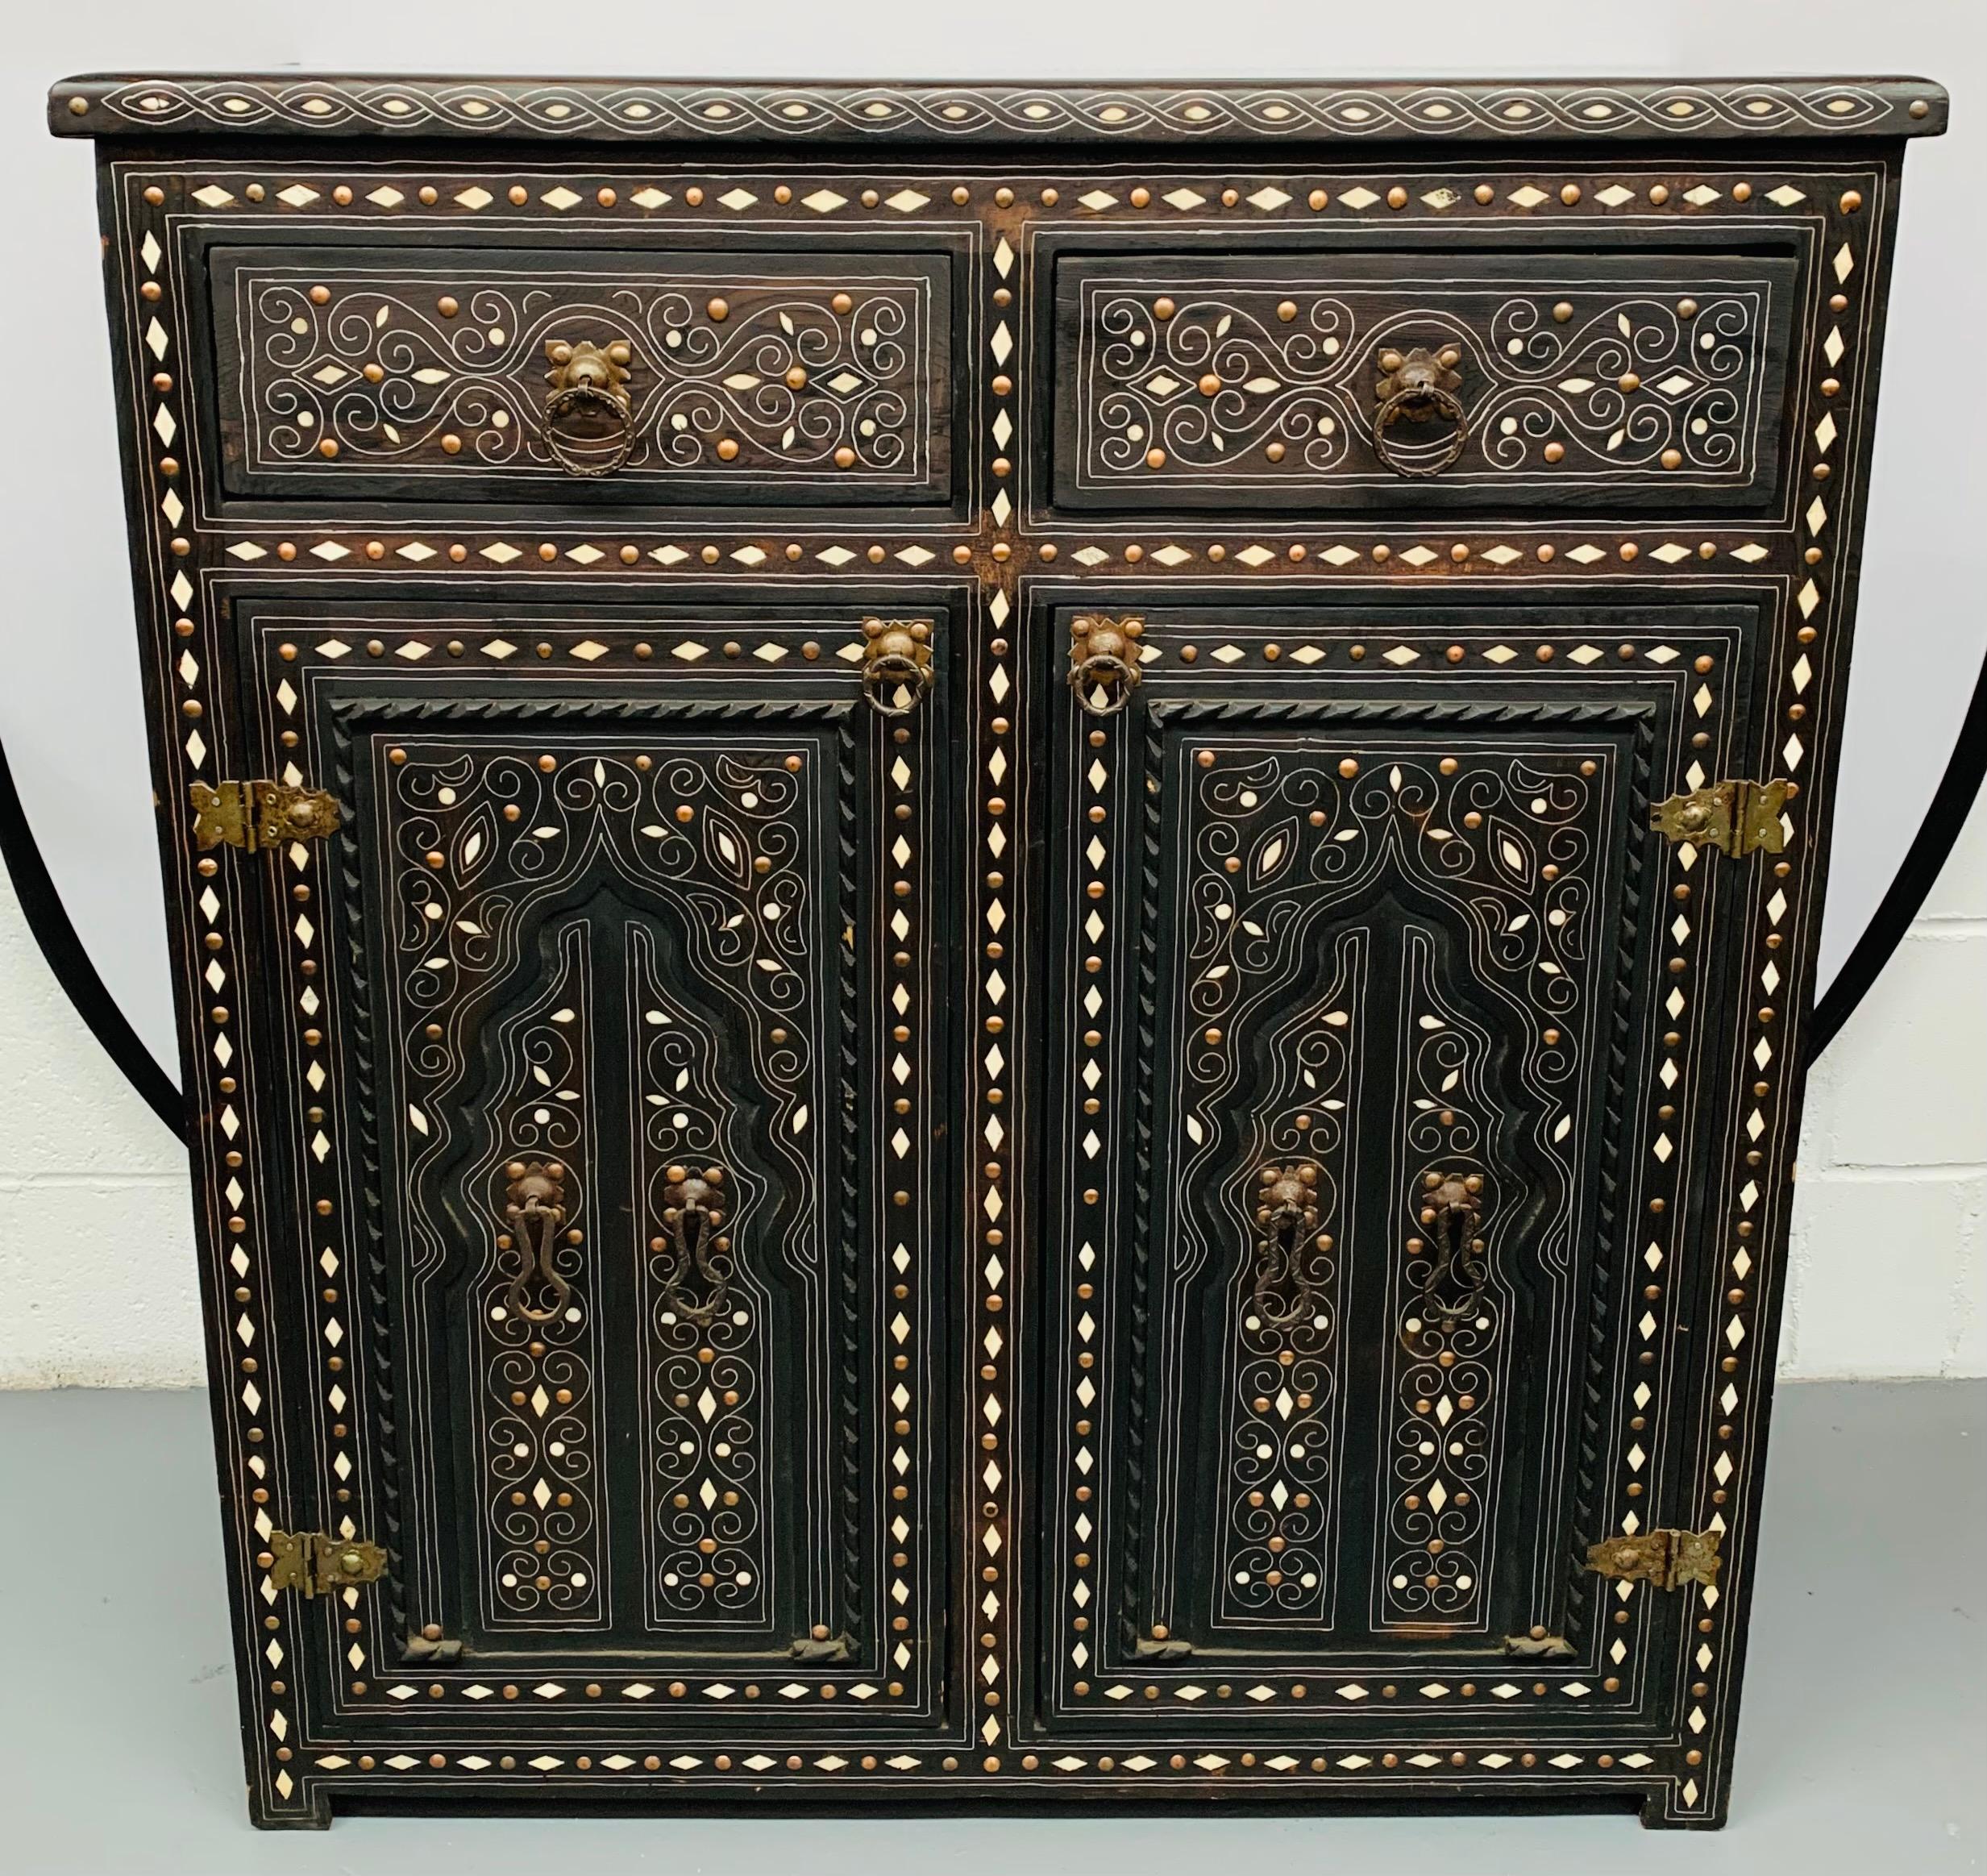 An early 20th century unique piece that was acquired in a Riad of a private collector in Marrakech. The chest, commode to cabinet features high quality inlay of white camel bone and brass. The ebonized wood will make this piece seamlessly blend in